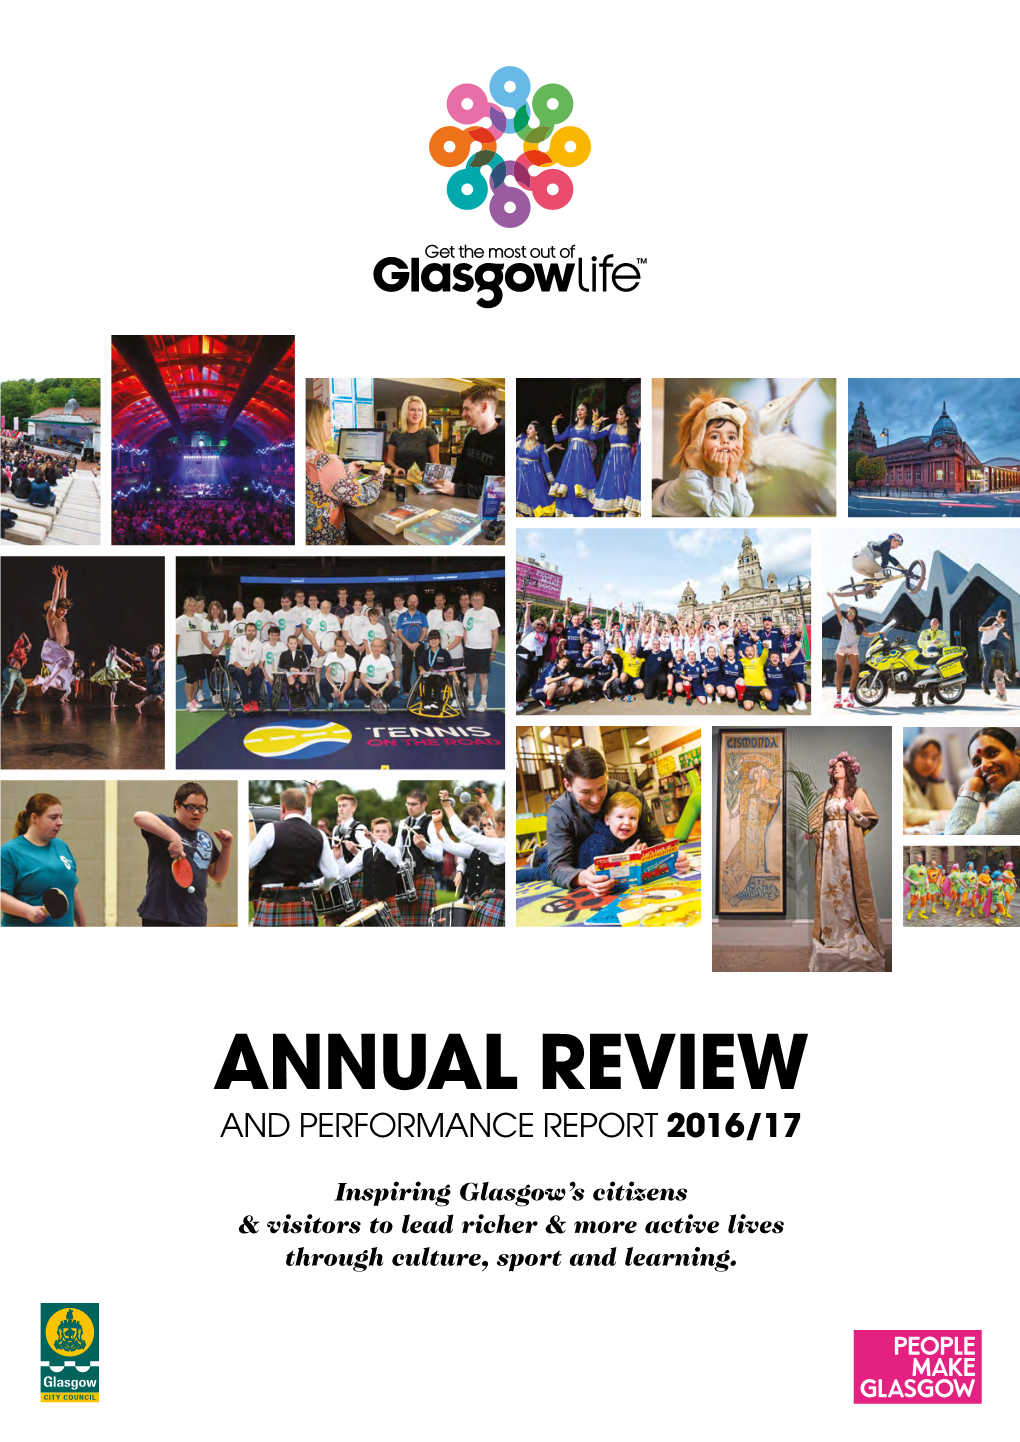 Annual Review and Performance Report 2016/17